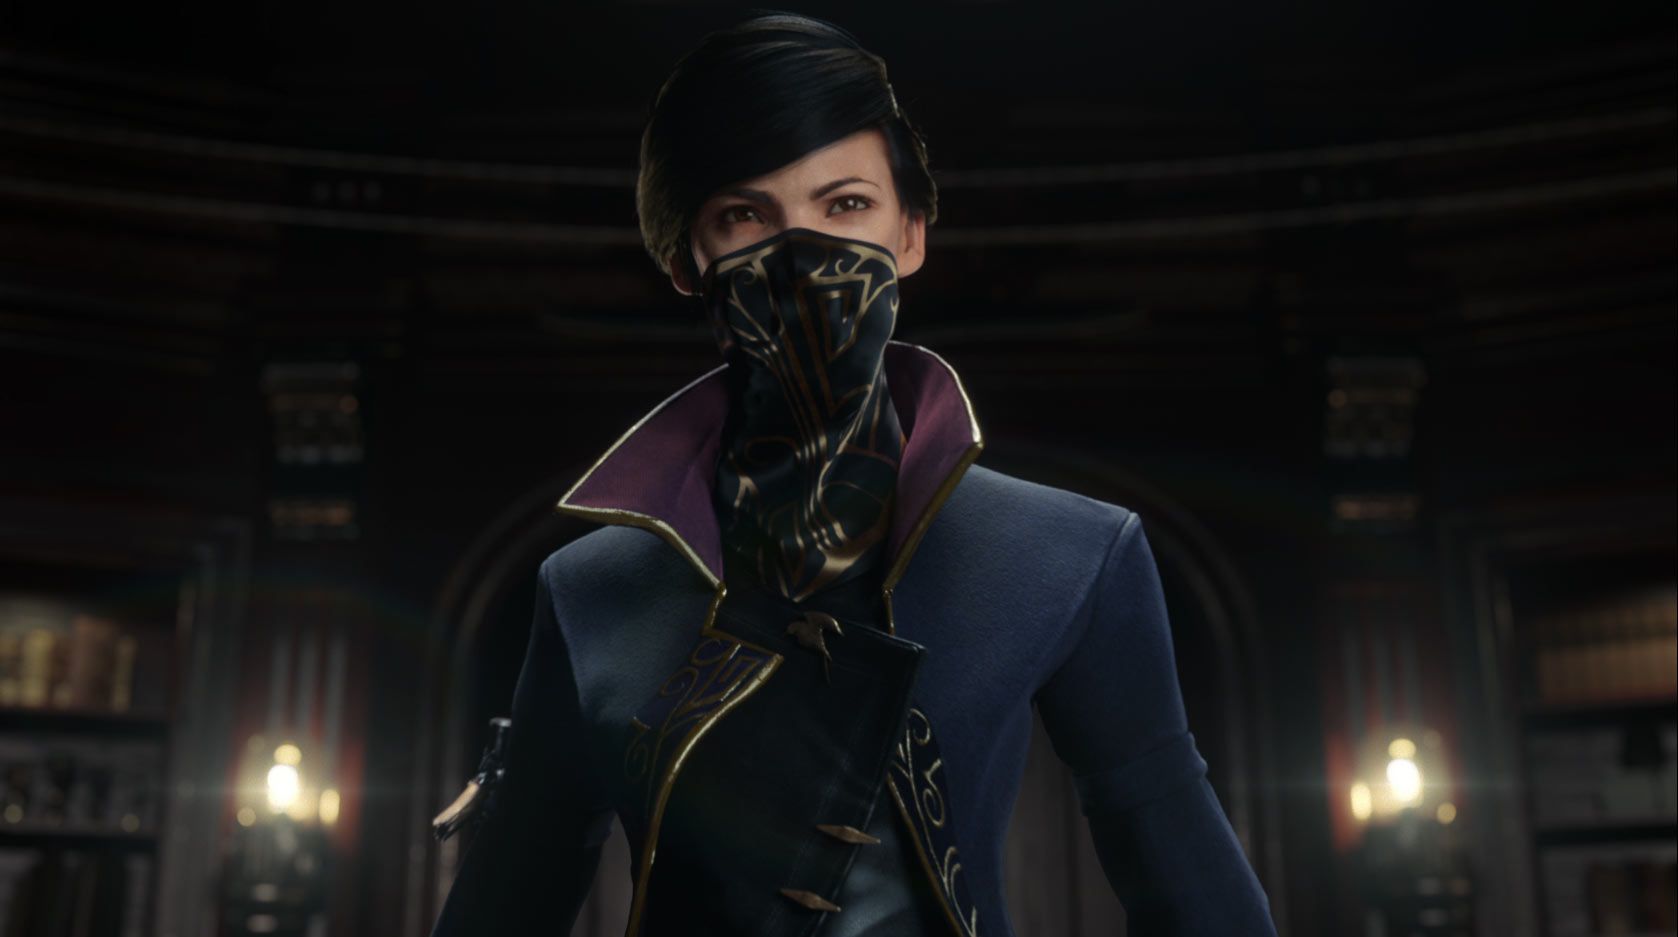 Dishonored 2' review: Little to get excited about - The Washington